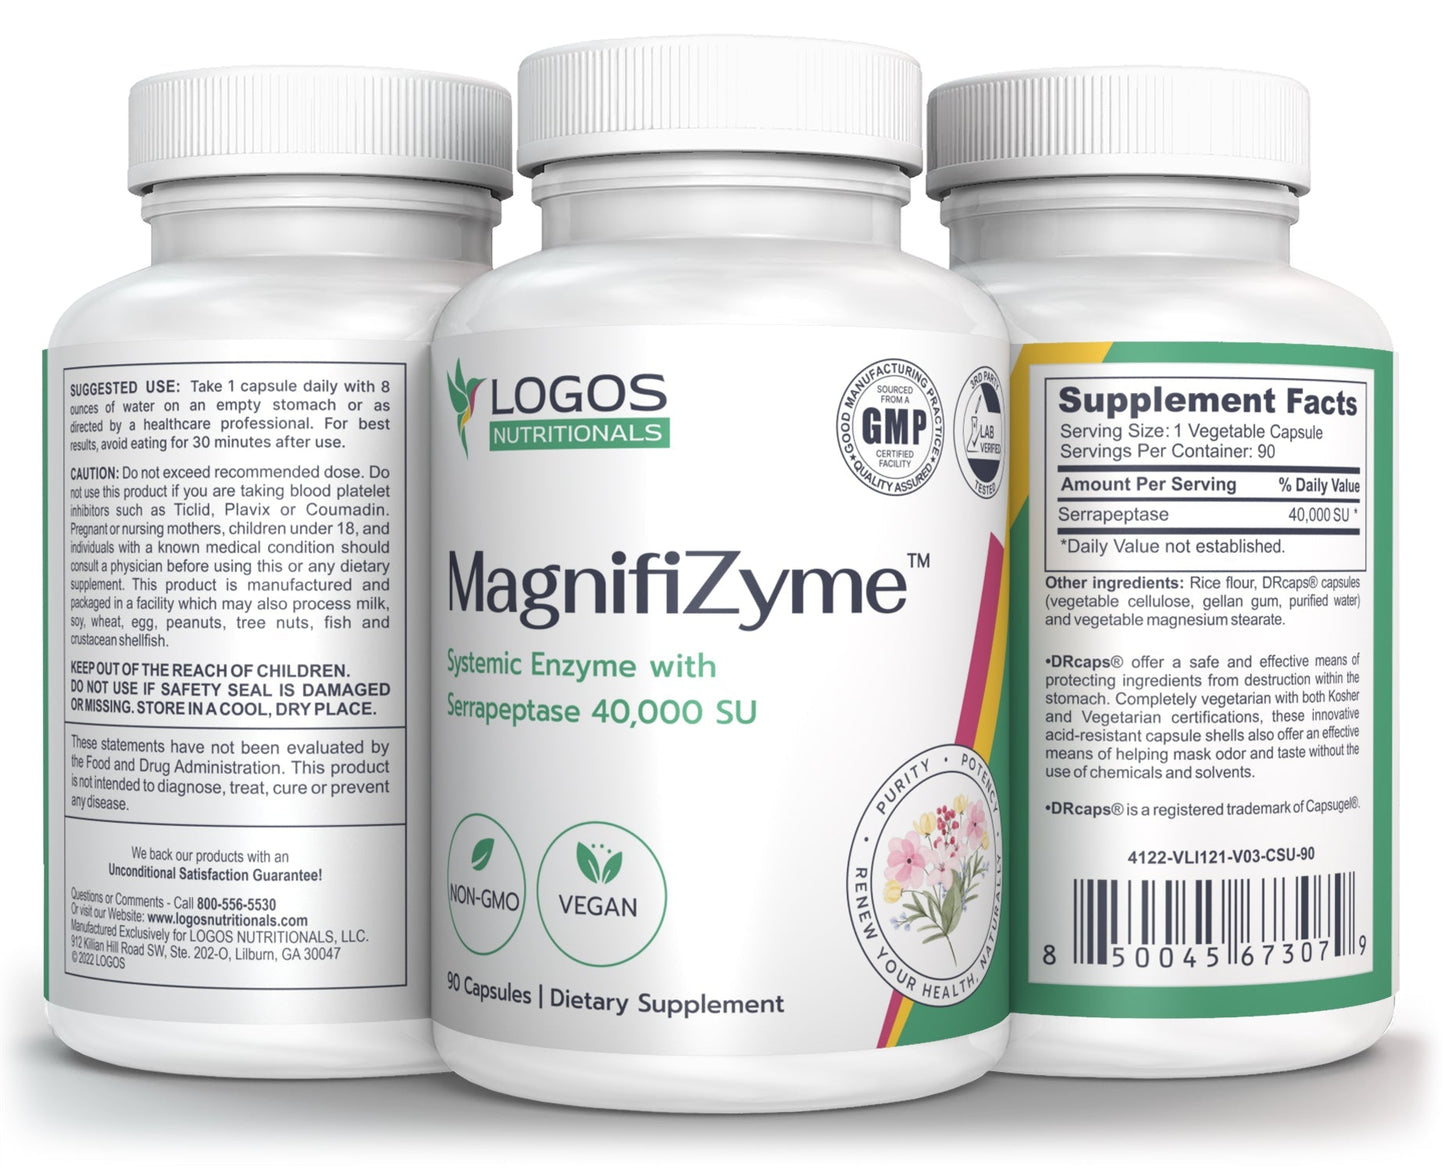 Regenerative Support for Wound Care - Magnifizyme